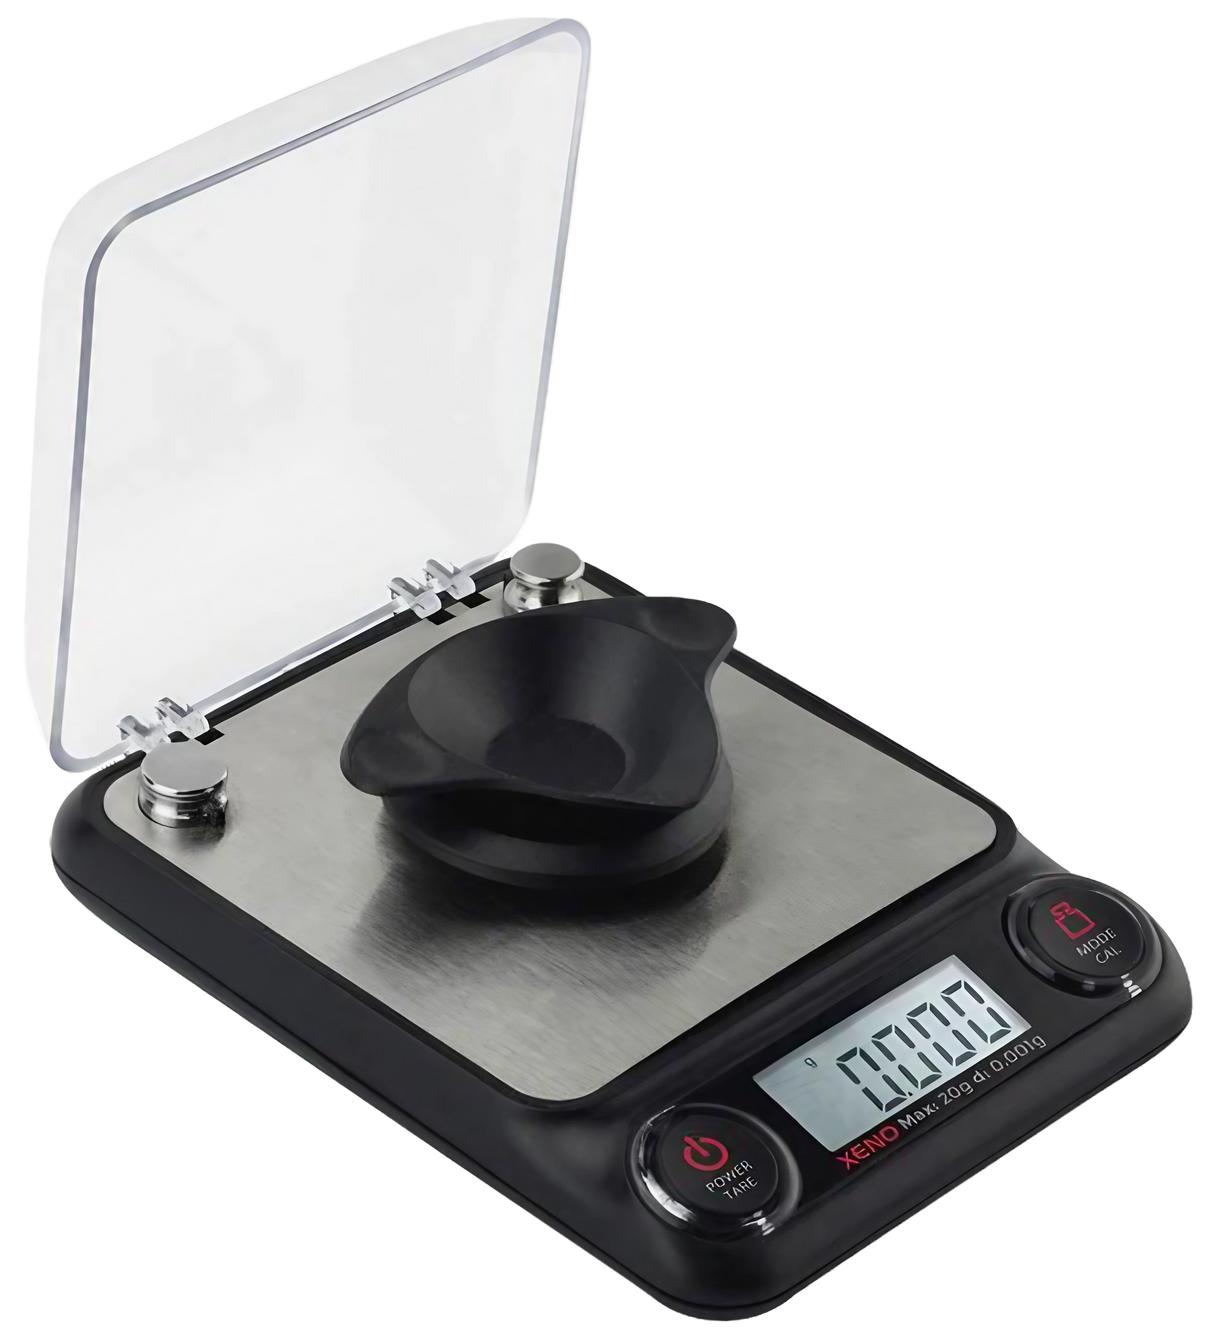 Truweigh Xeno Digital Milligram Scale, black, portable design, 0.001g accuracy, with open lid